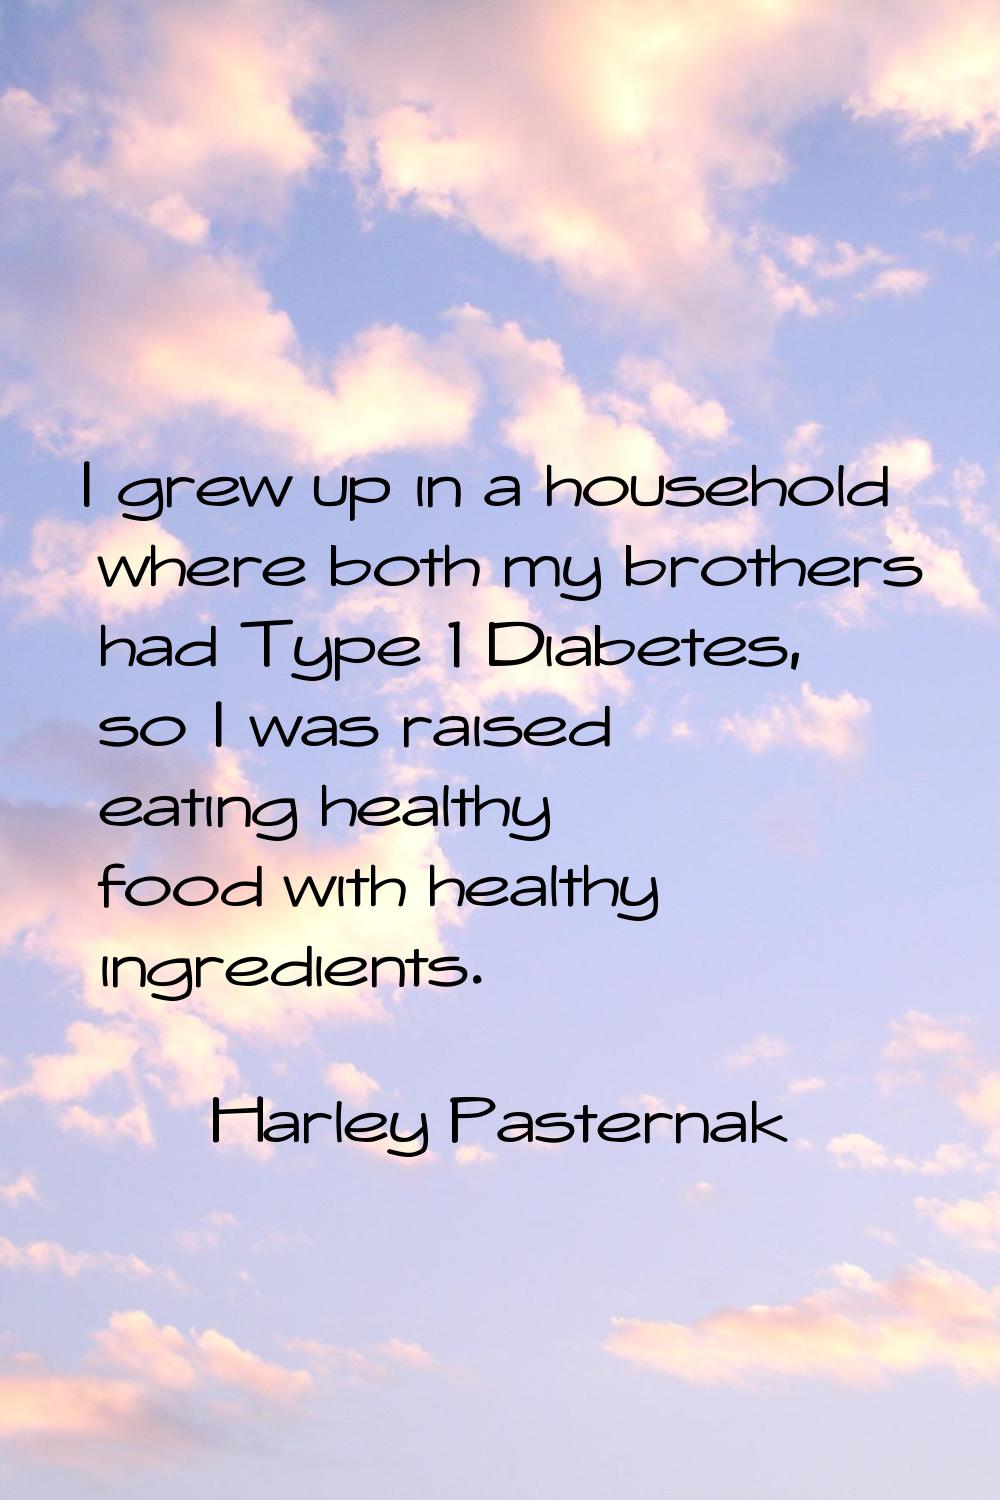 I grew up in a household where both my brothers had Type 1 Diabetes, so I was raised eating healthy